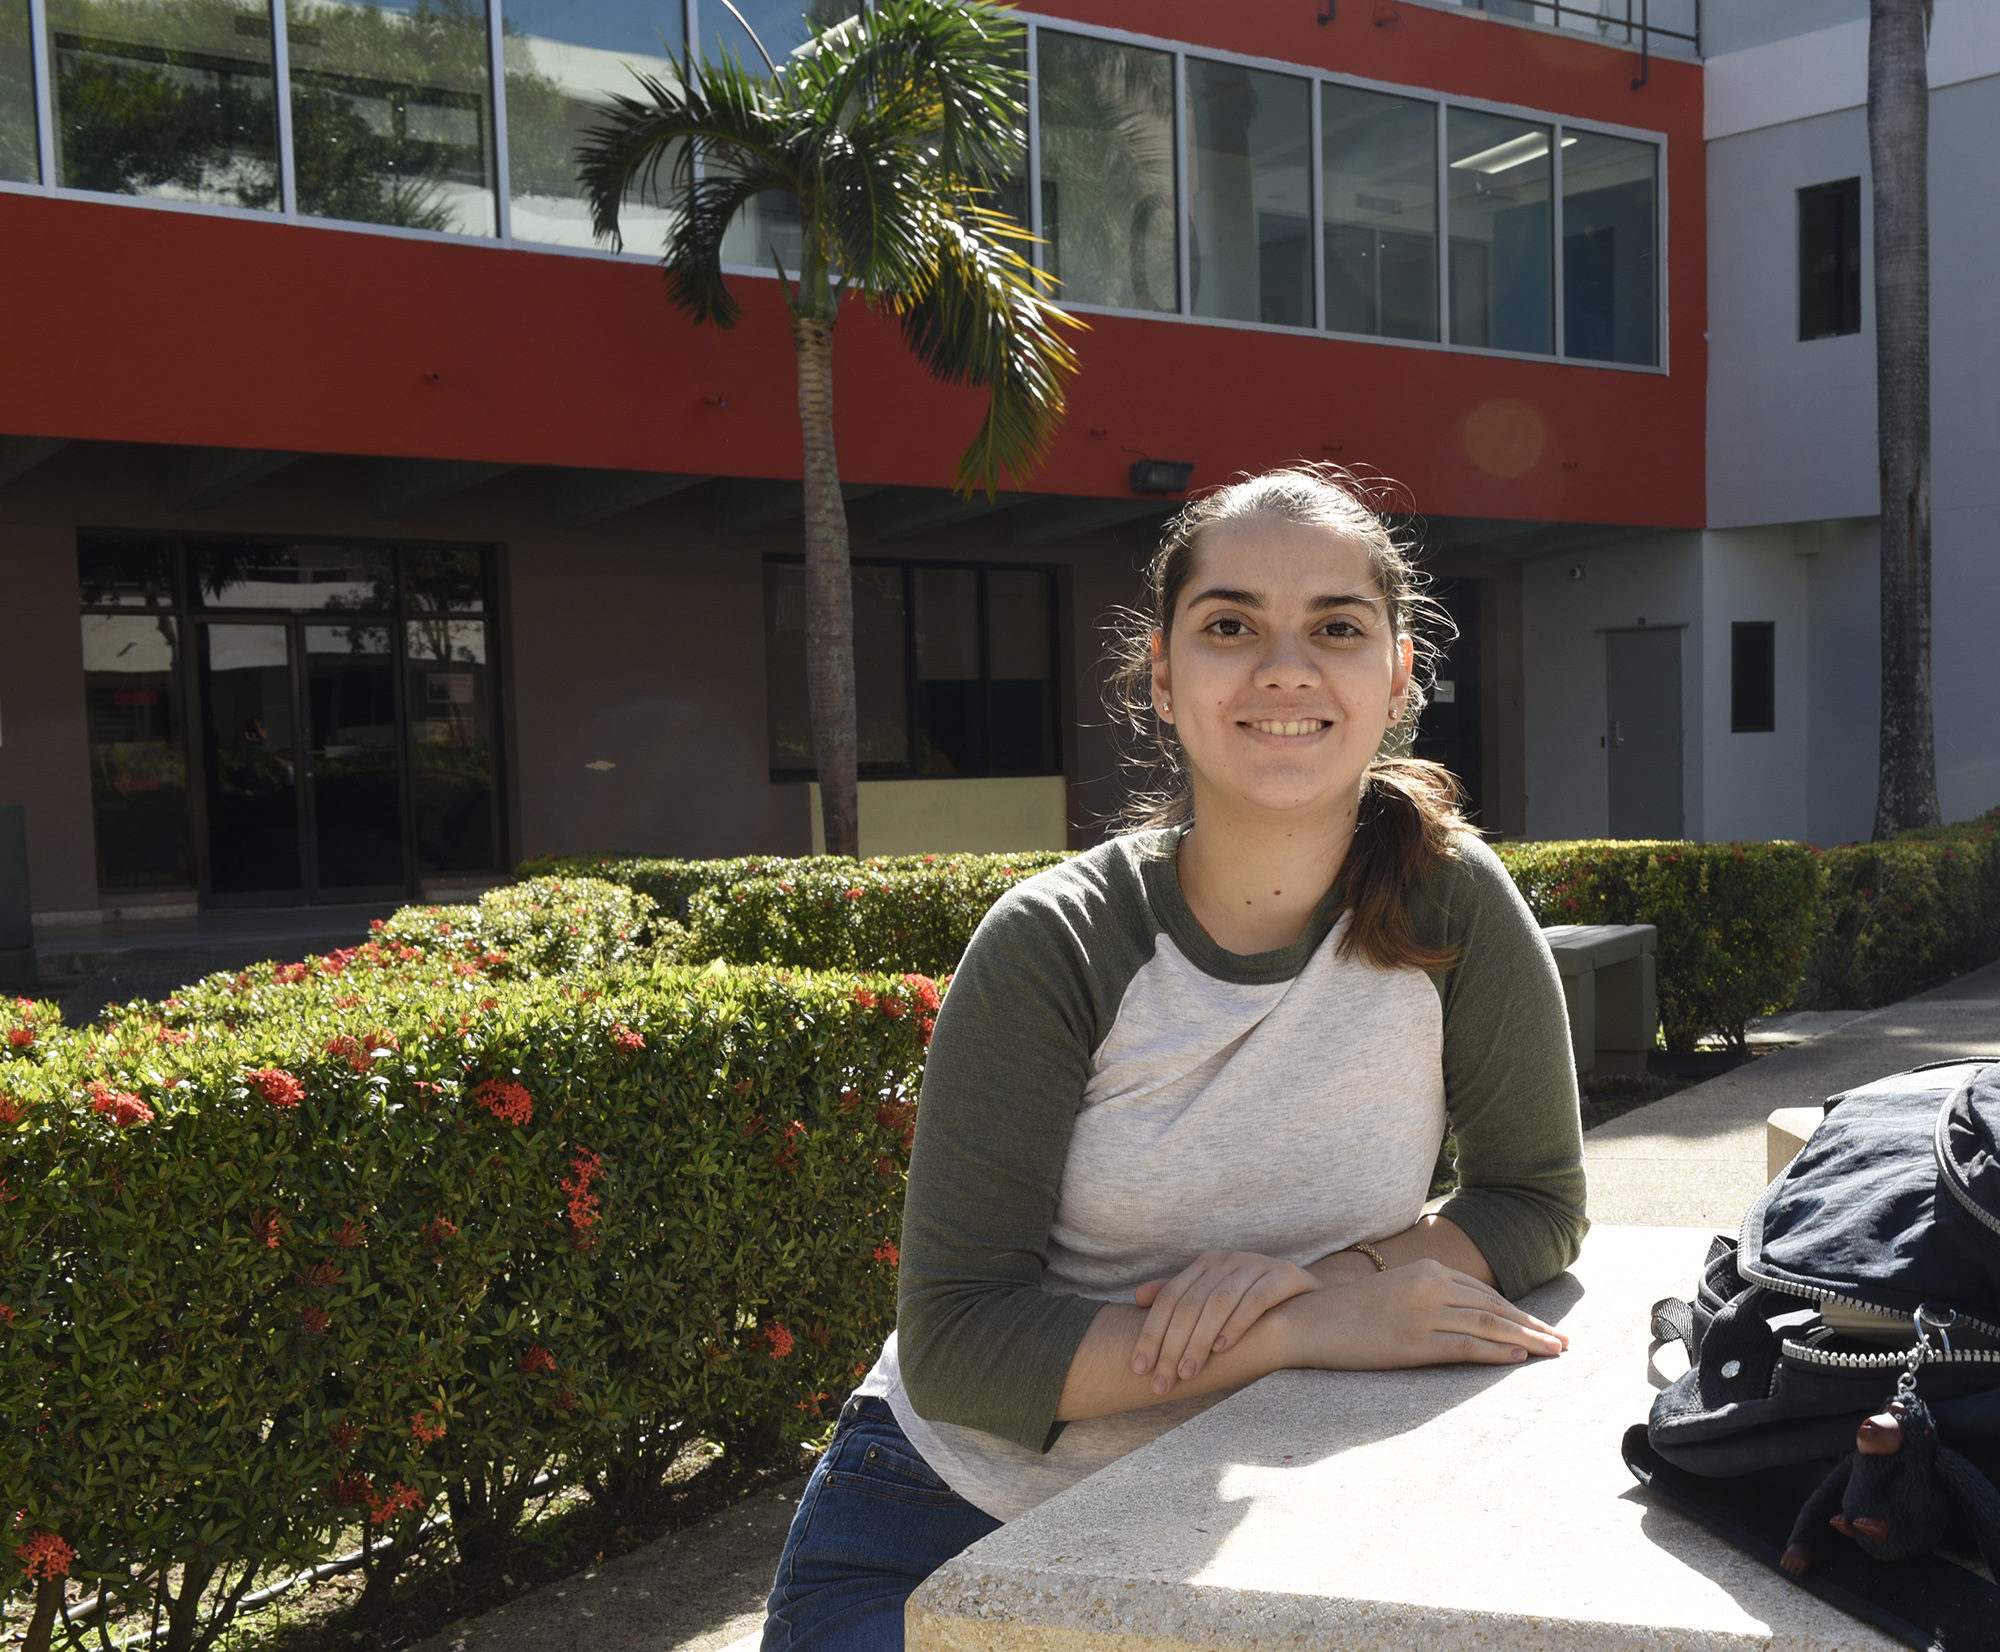 Genesis Rodriguez is a sophomore at la Universidad de Sagrado Corazon. Rodriguez said she has no regrets staying on the island after Hurricane Maria. “This is my home,” Rodriguez said. Photo by Lauren Lee